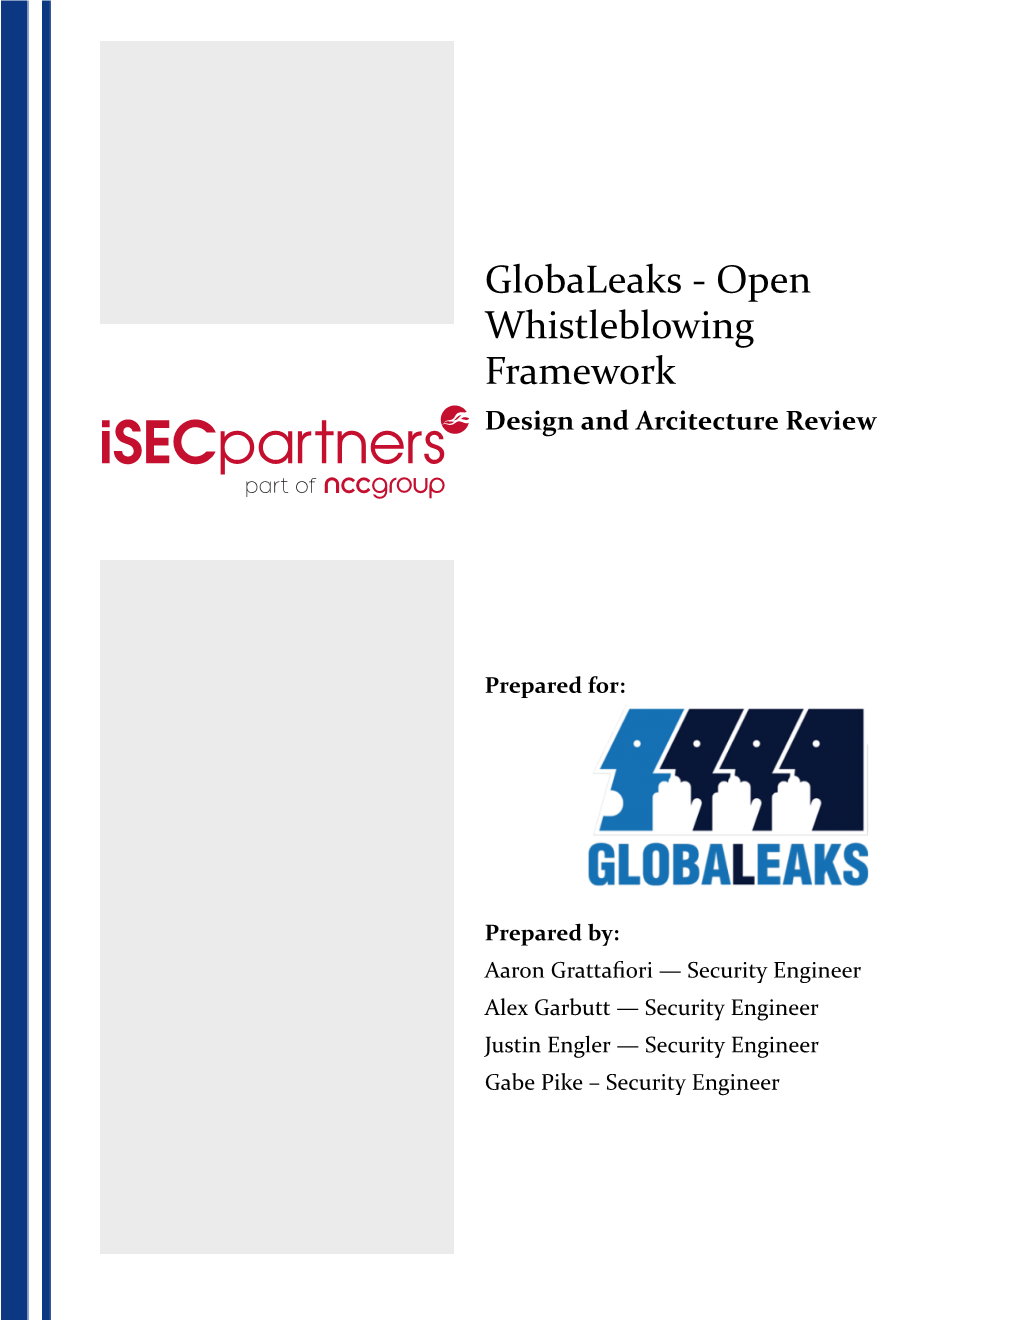 Open Whistleblowing Framework Design and Arcitecture Review